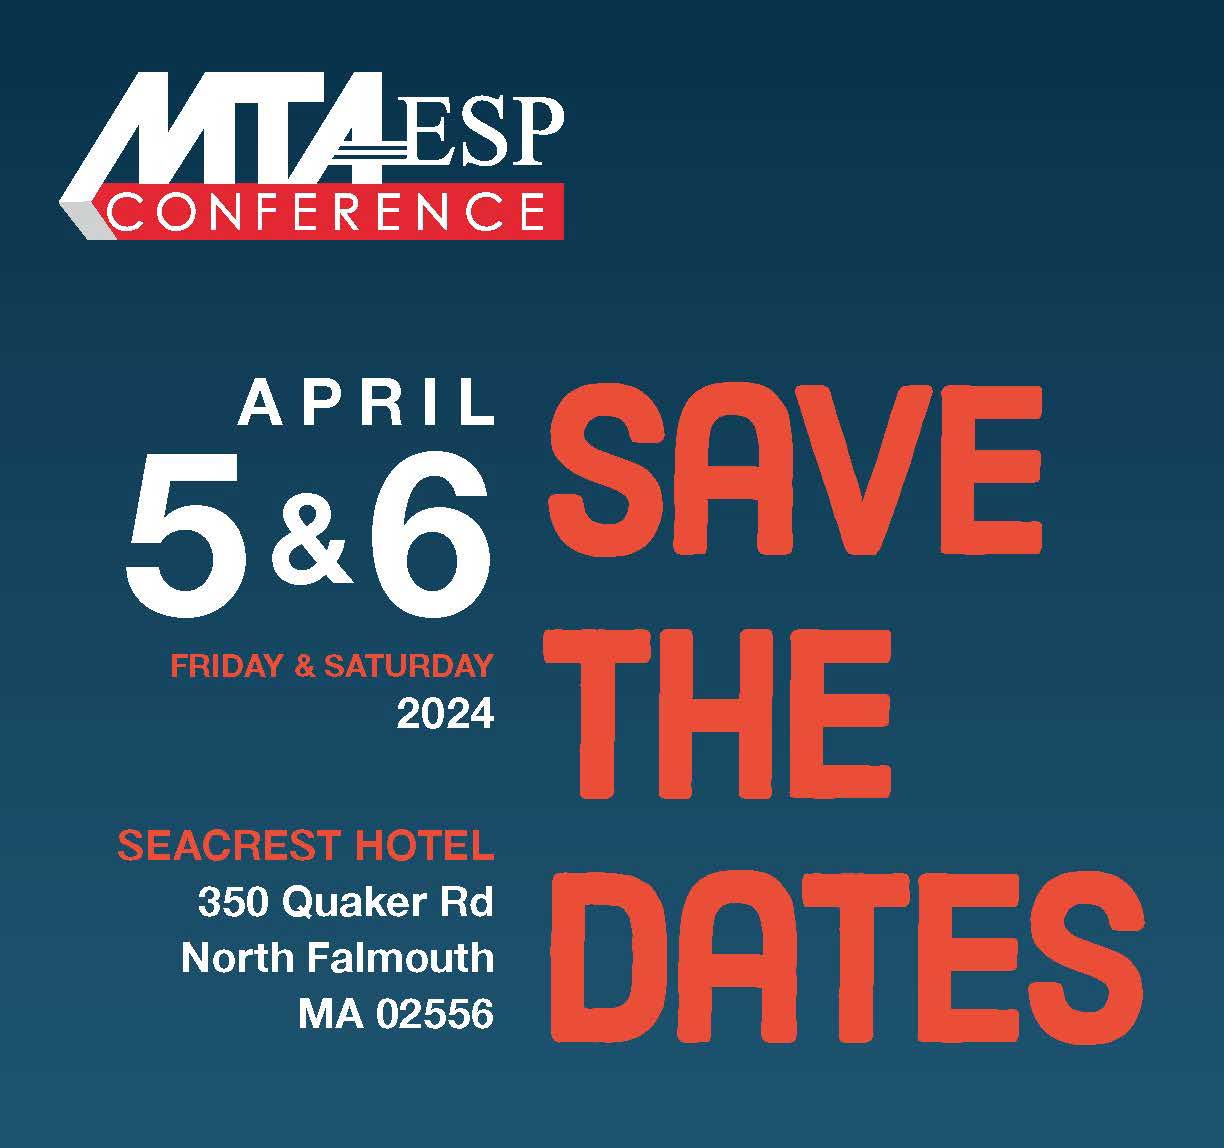 Make plans to participate in the MTA ESP Conference